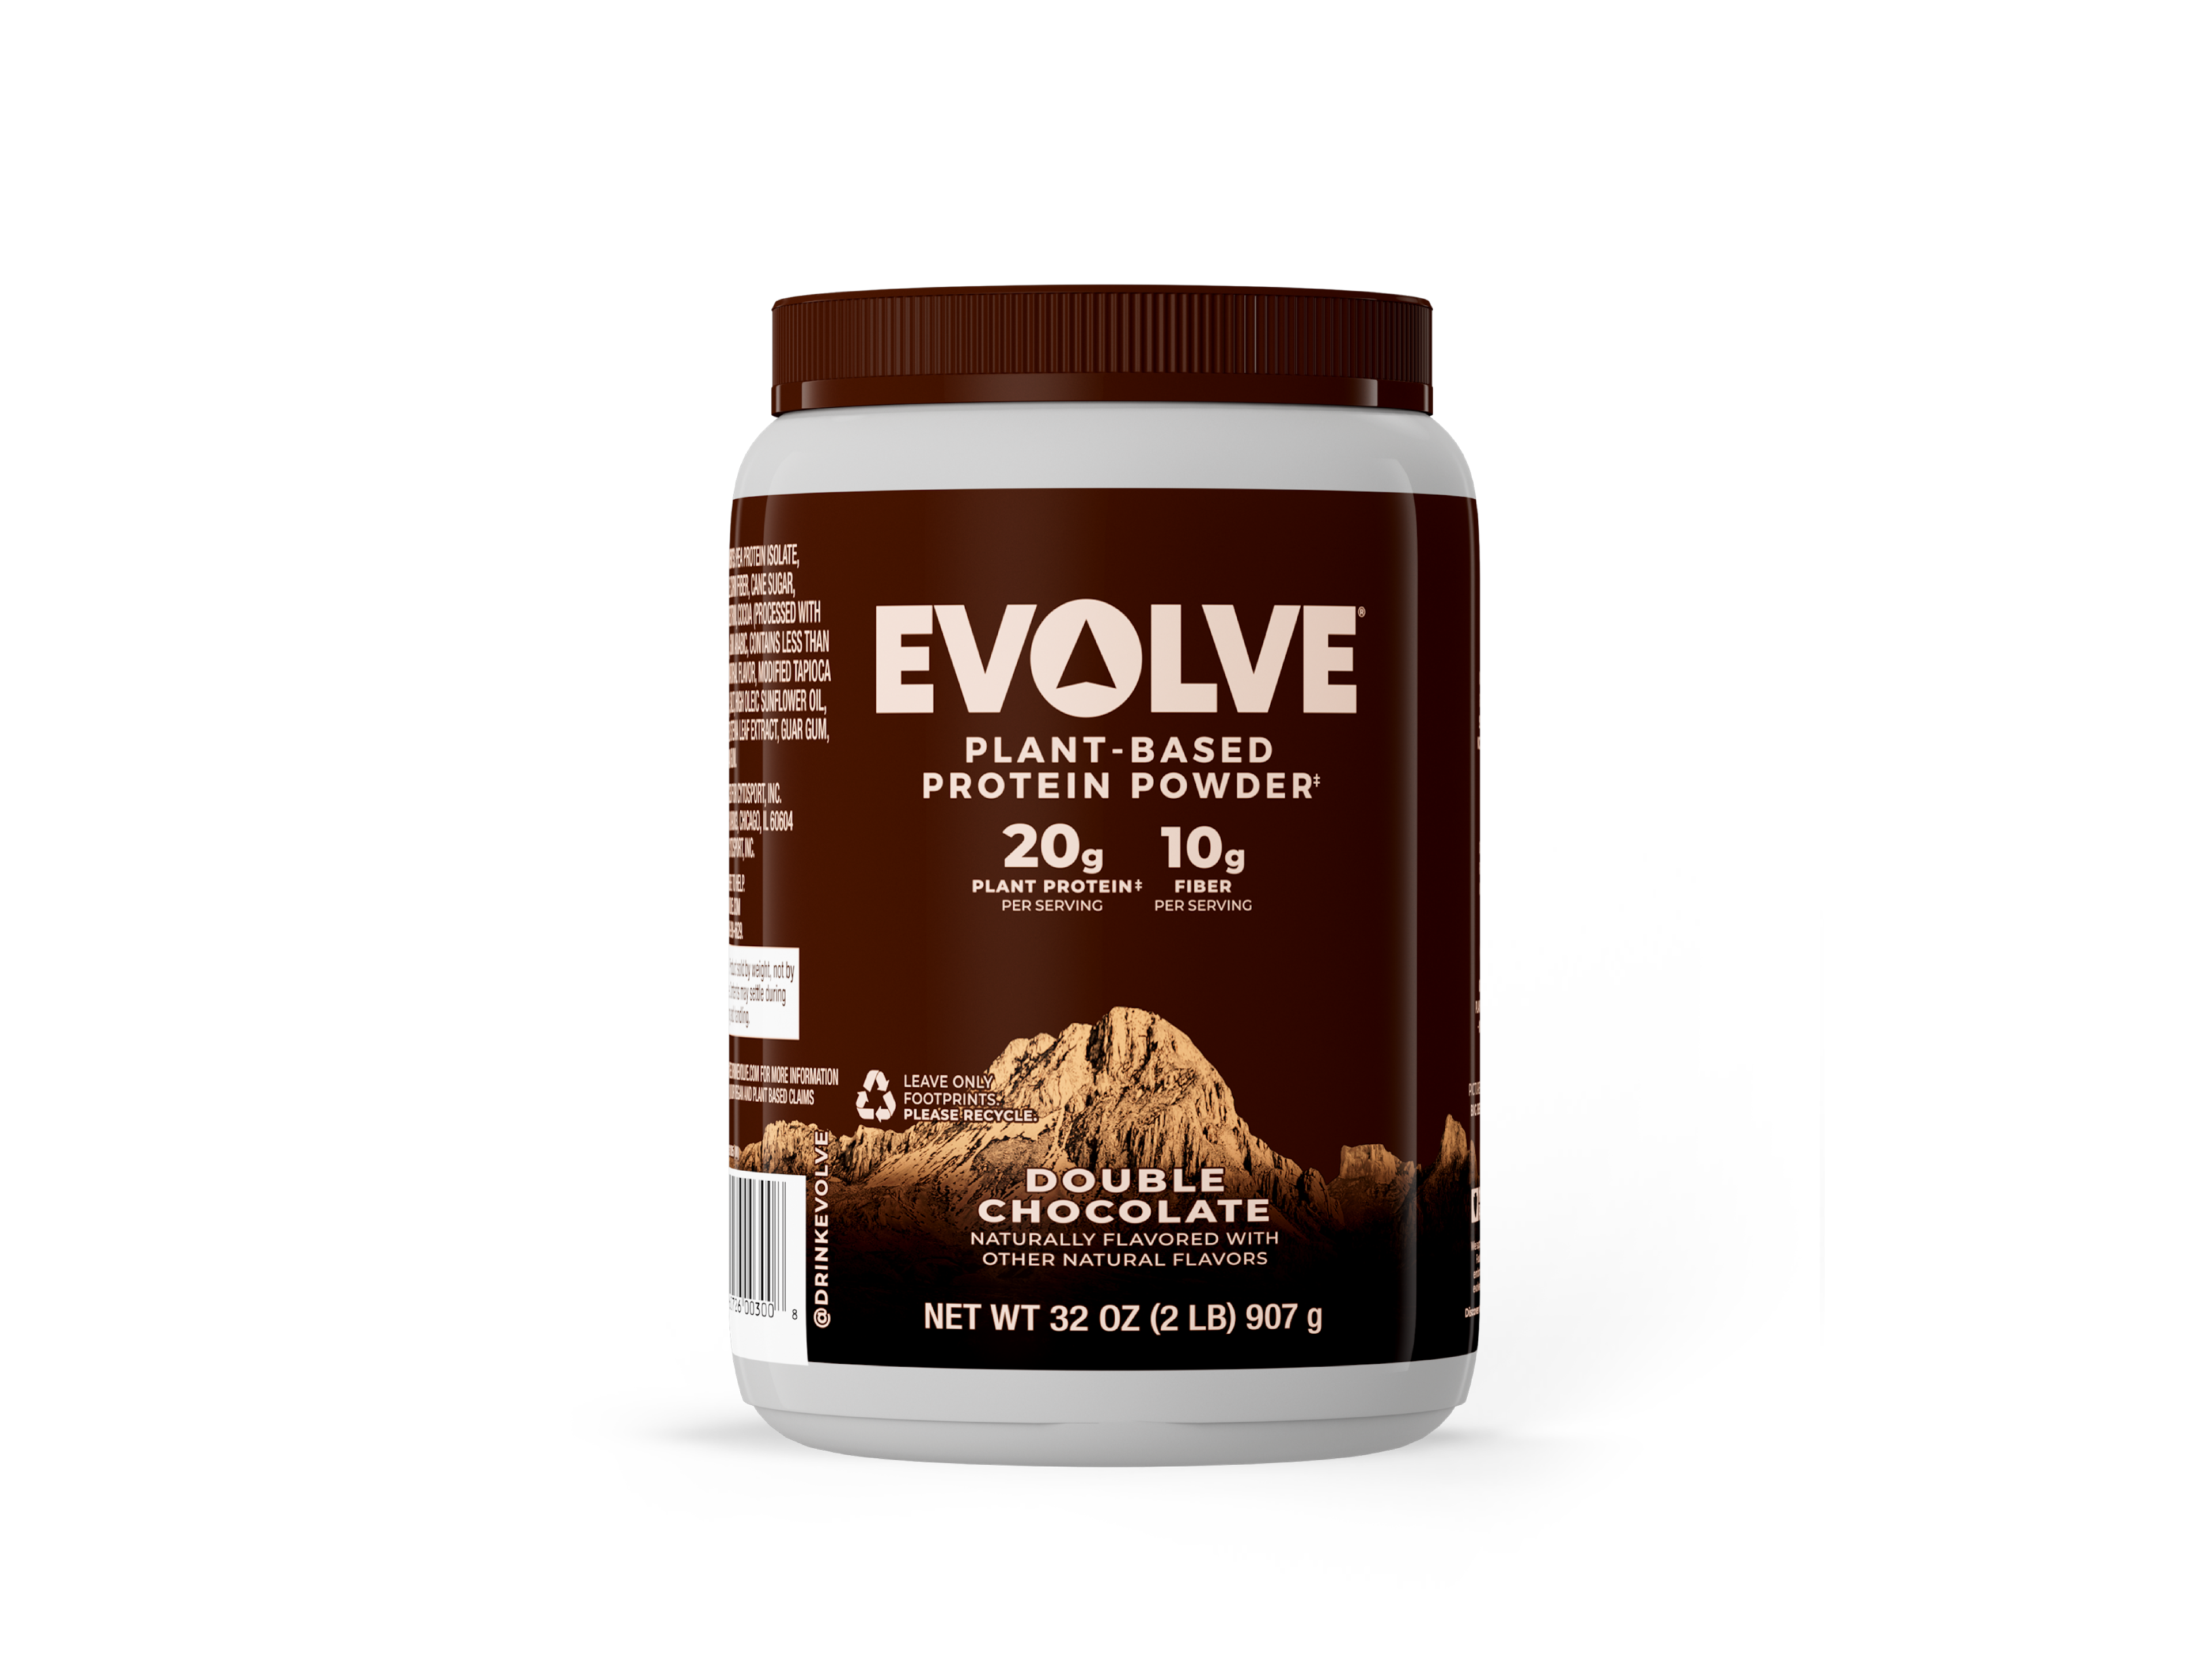 Evolve Plant-Based Protein Powder - Double Chocolate